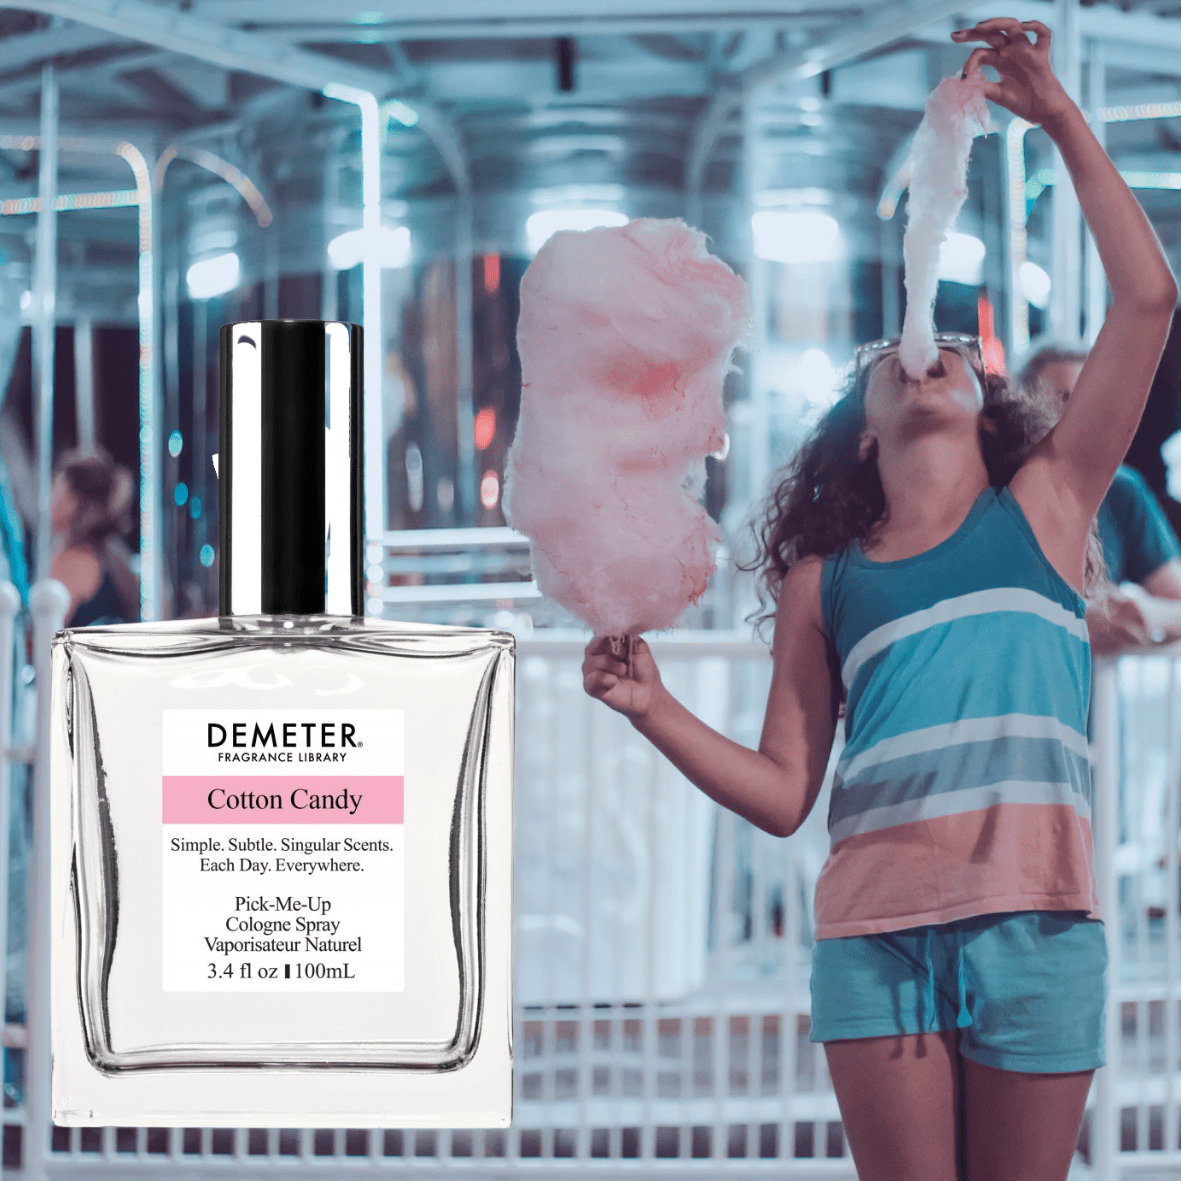 Demeter Cotton Candy 
Best Cotton Candy Perfumes